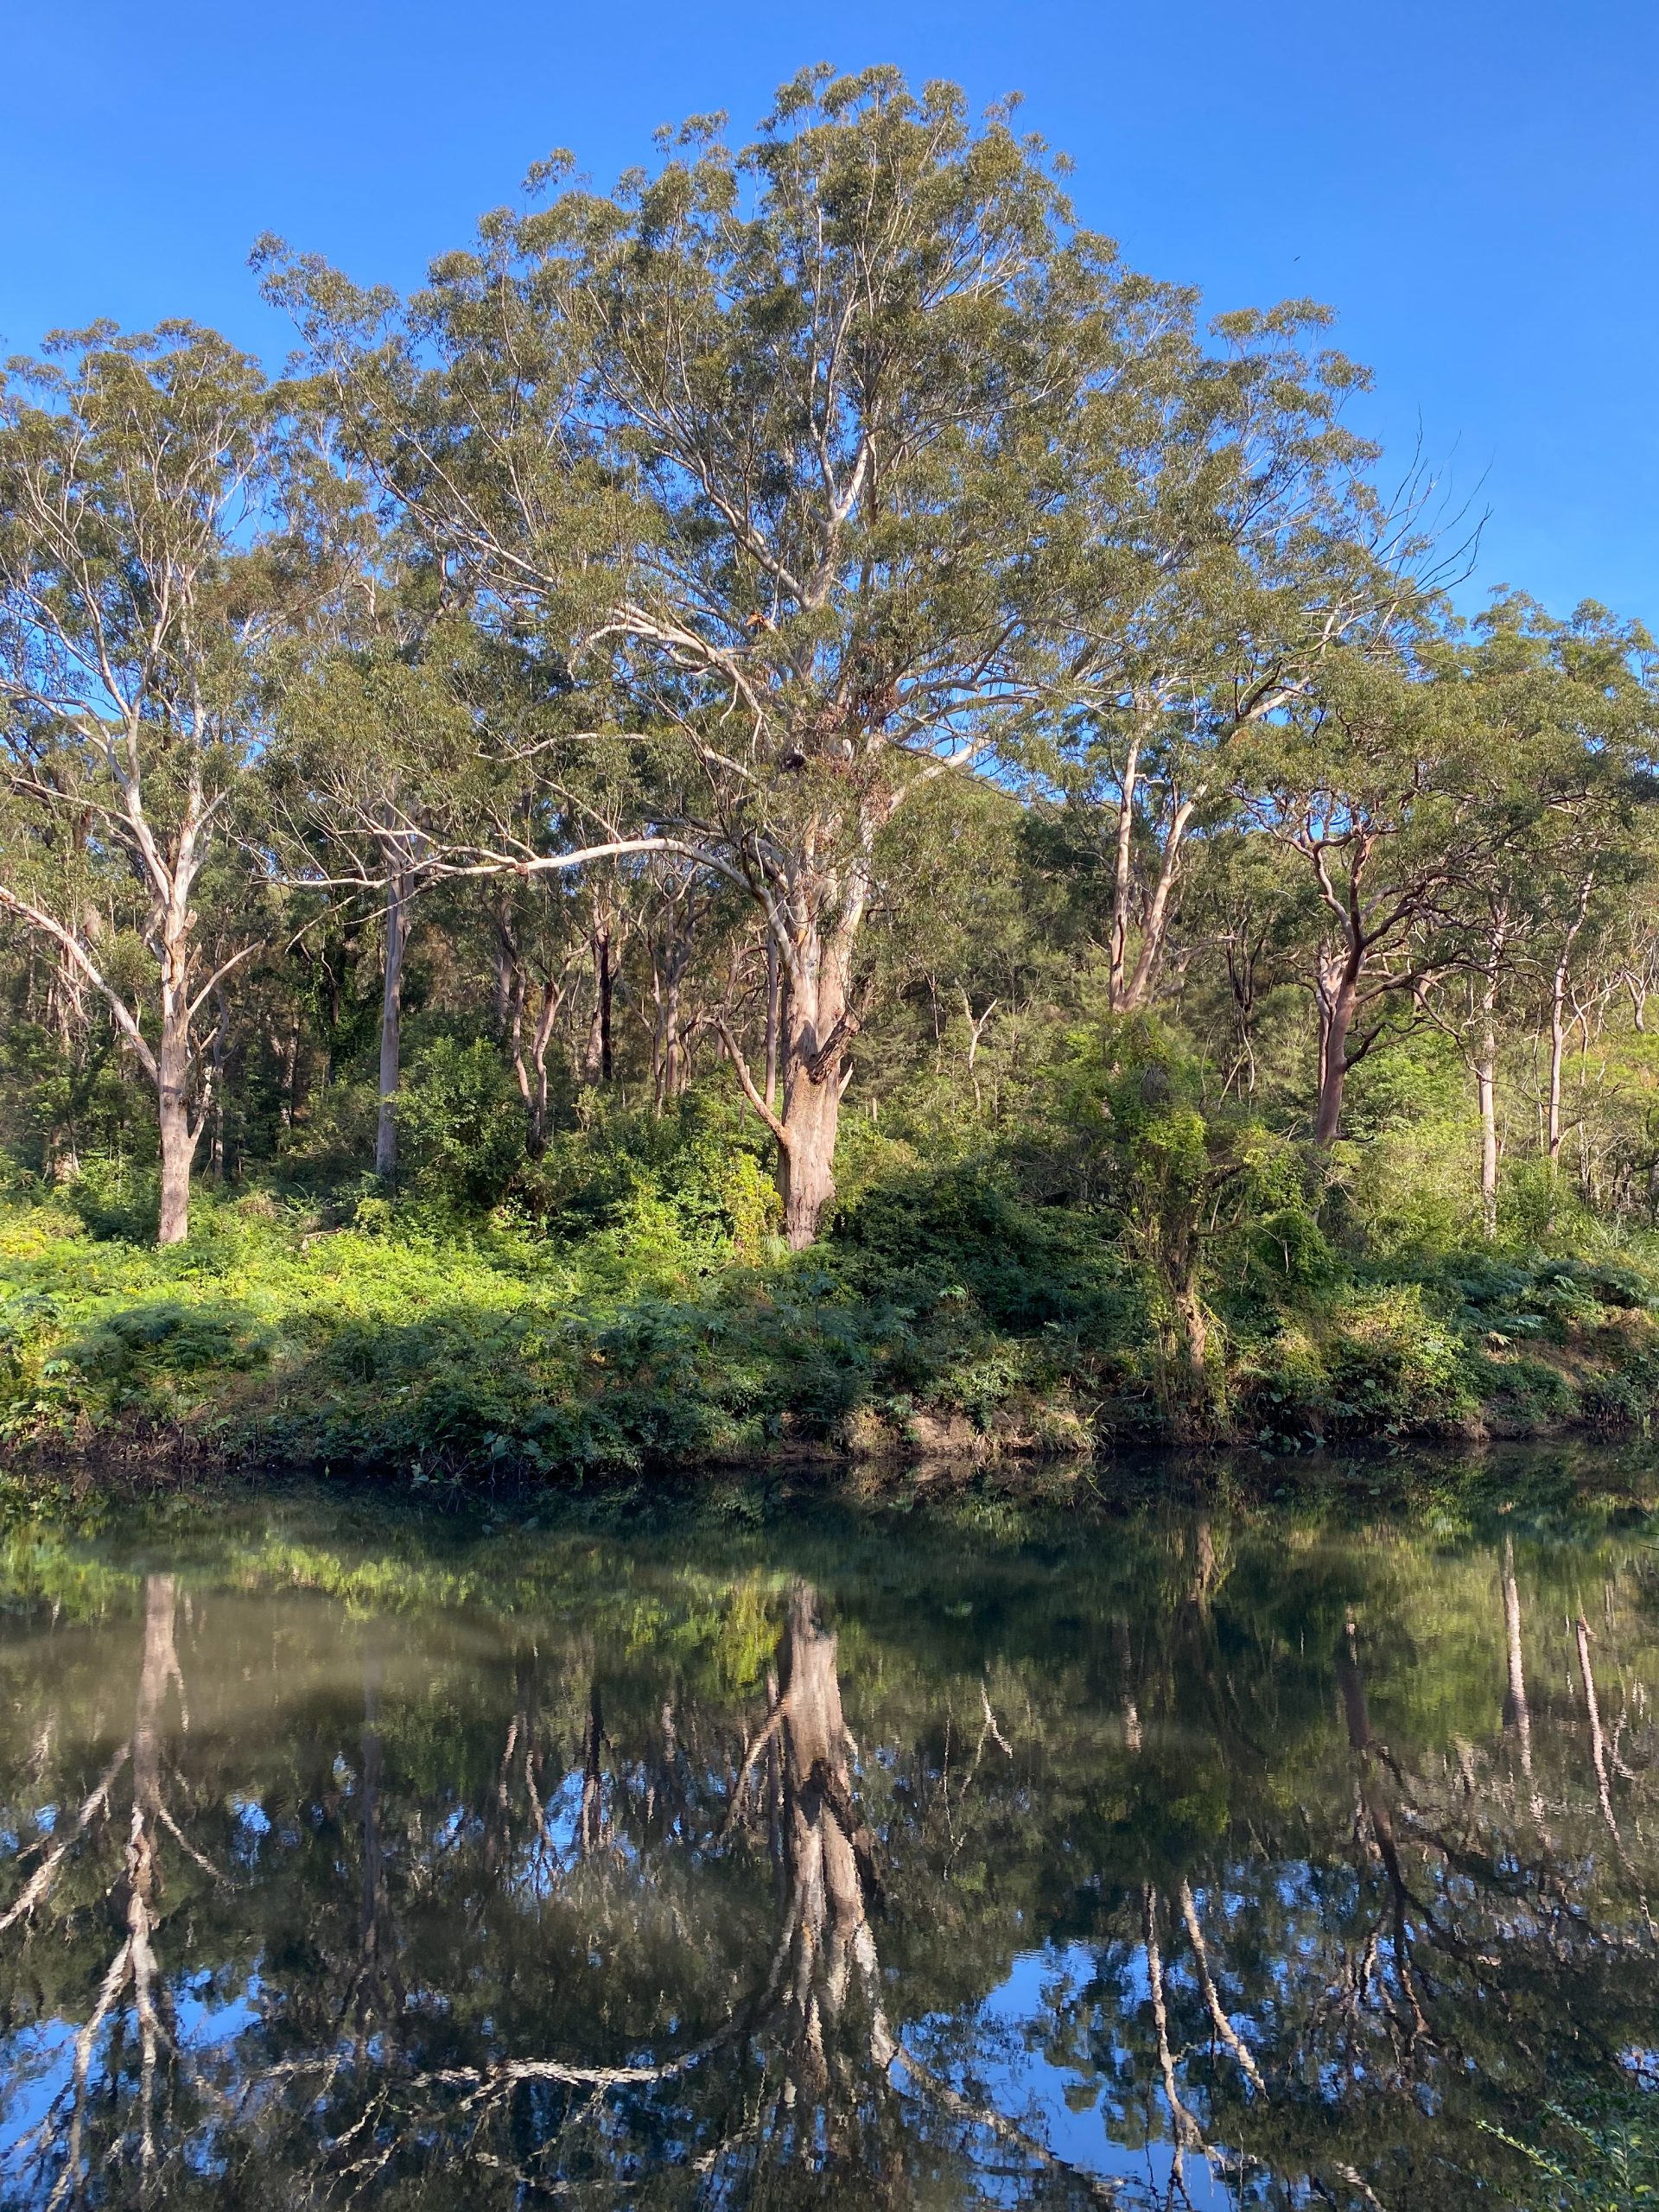 A tree reflected in the water in a national park. Photo: Tim Ashelford